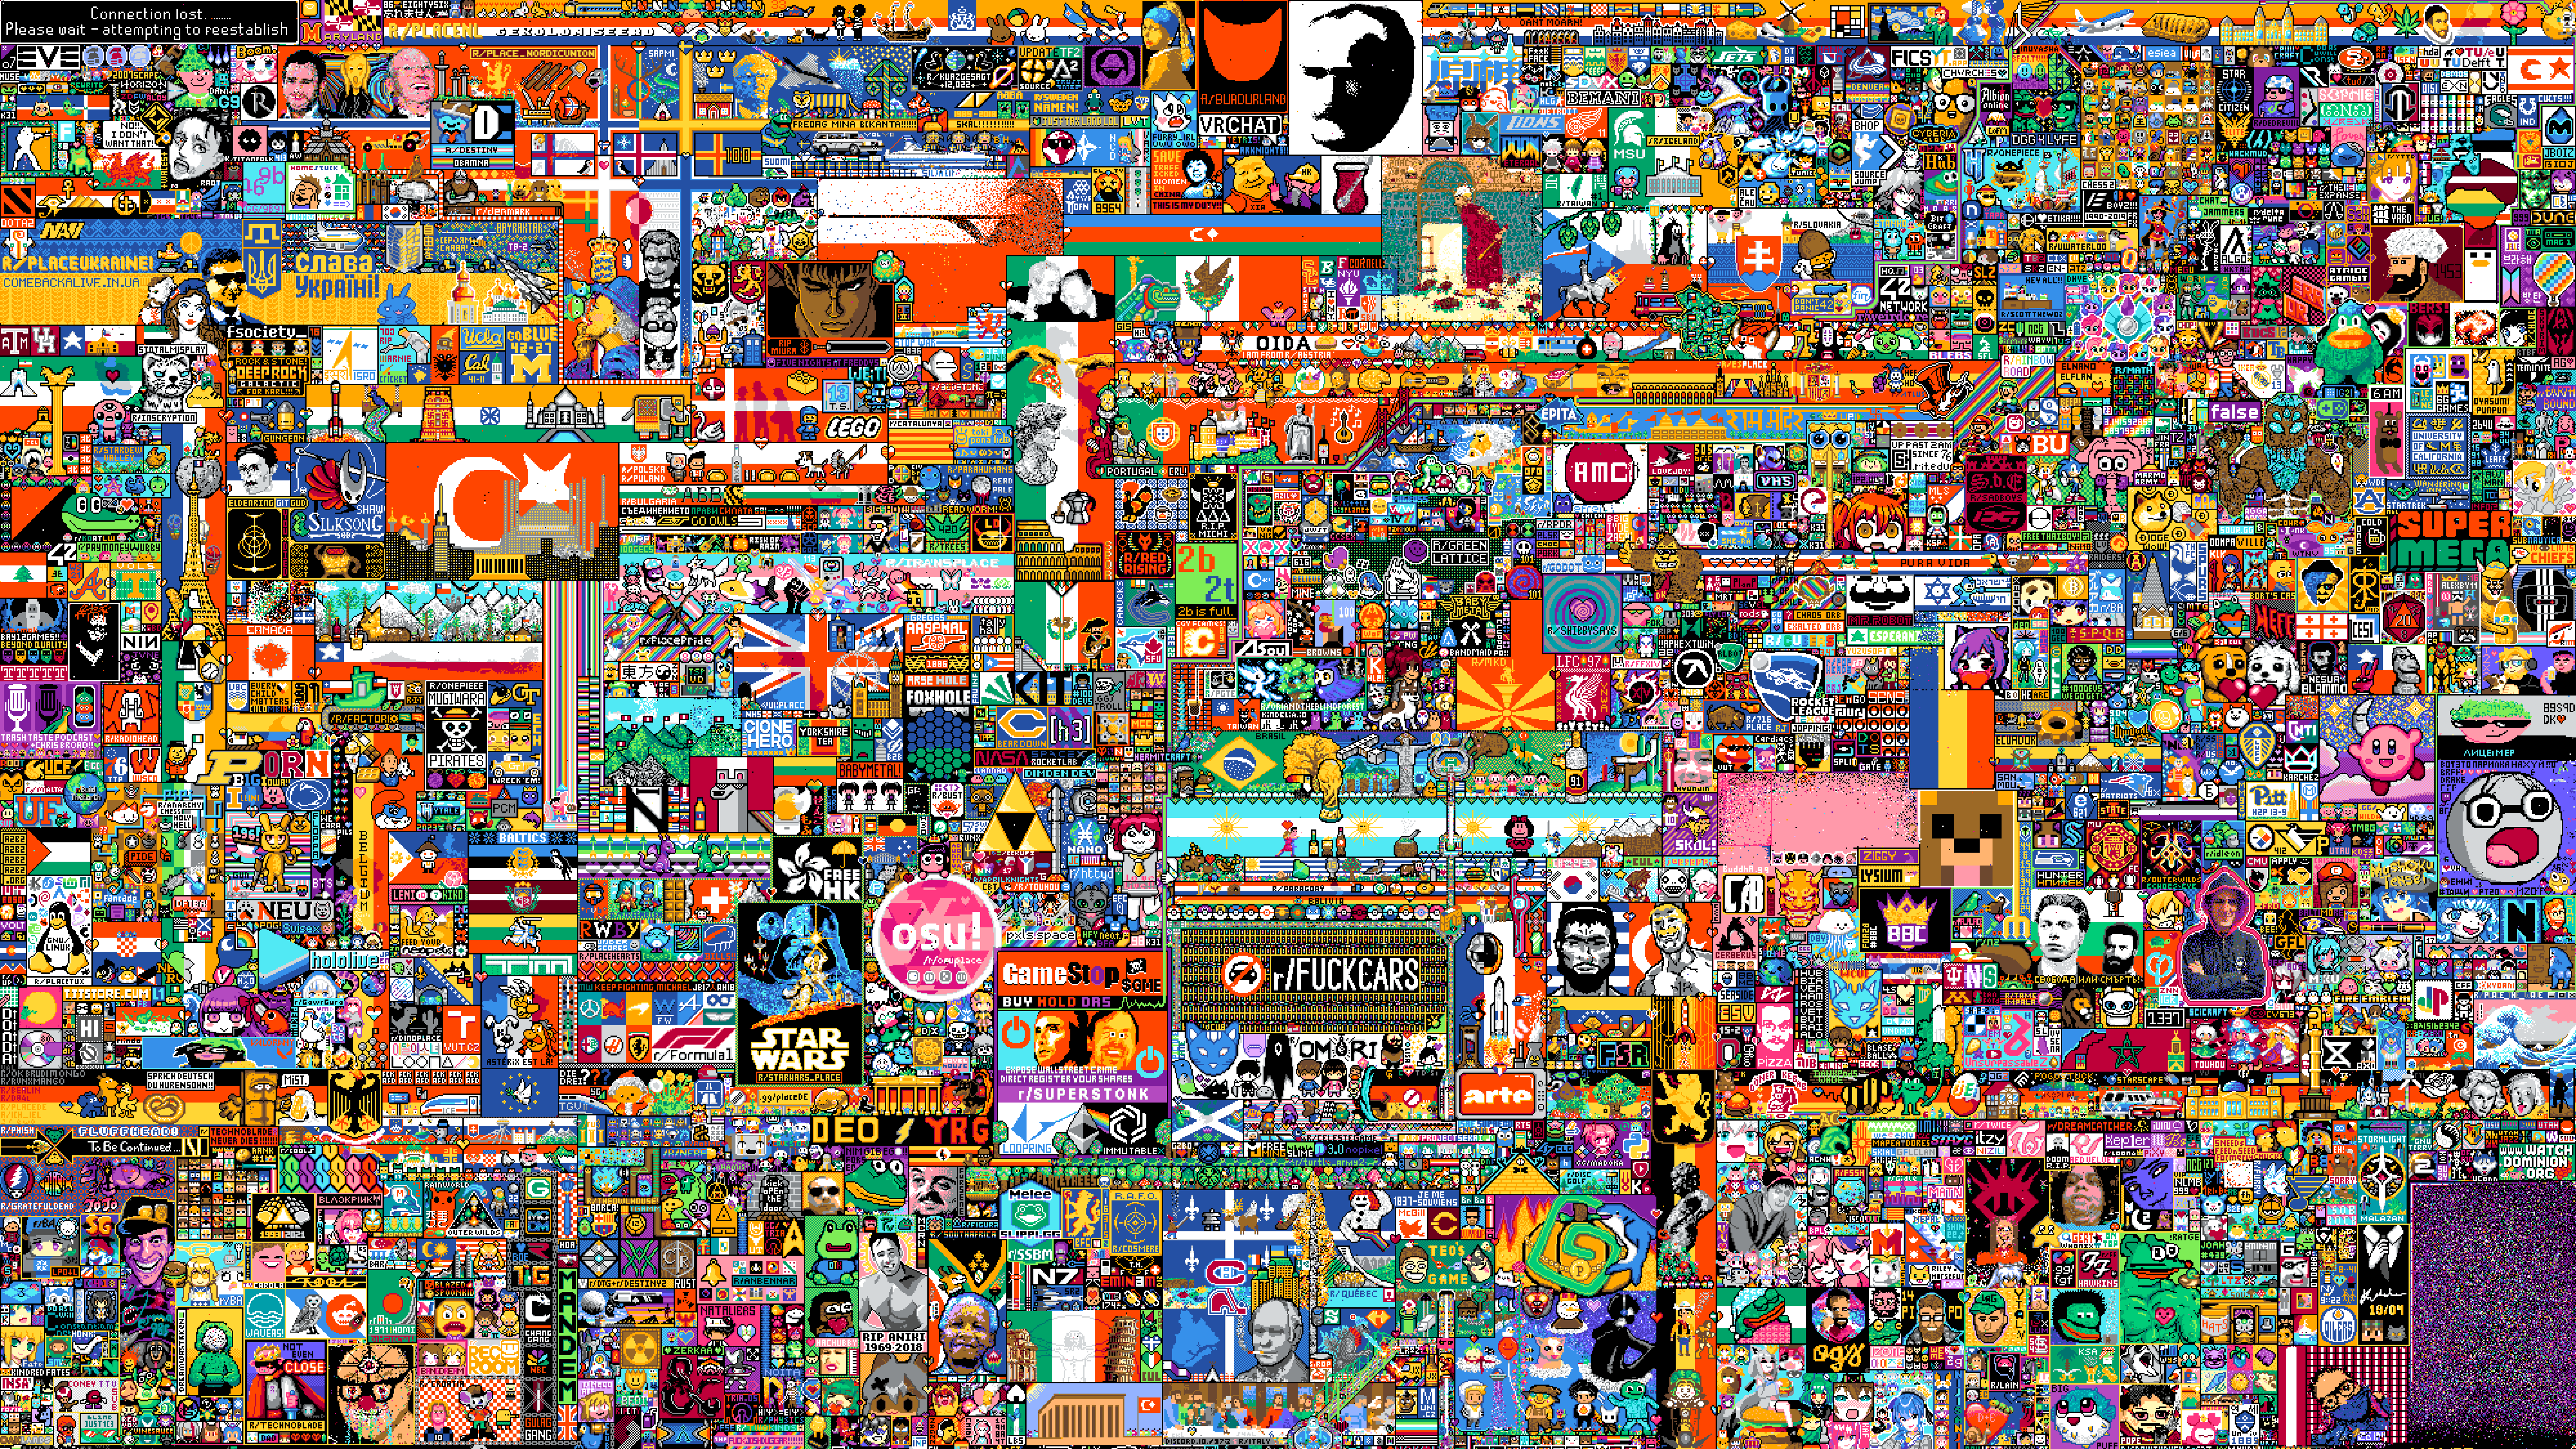 A portion of the r/place image created by hundreds of Reddit users over just a few days. (Image: Reddit)